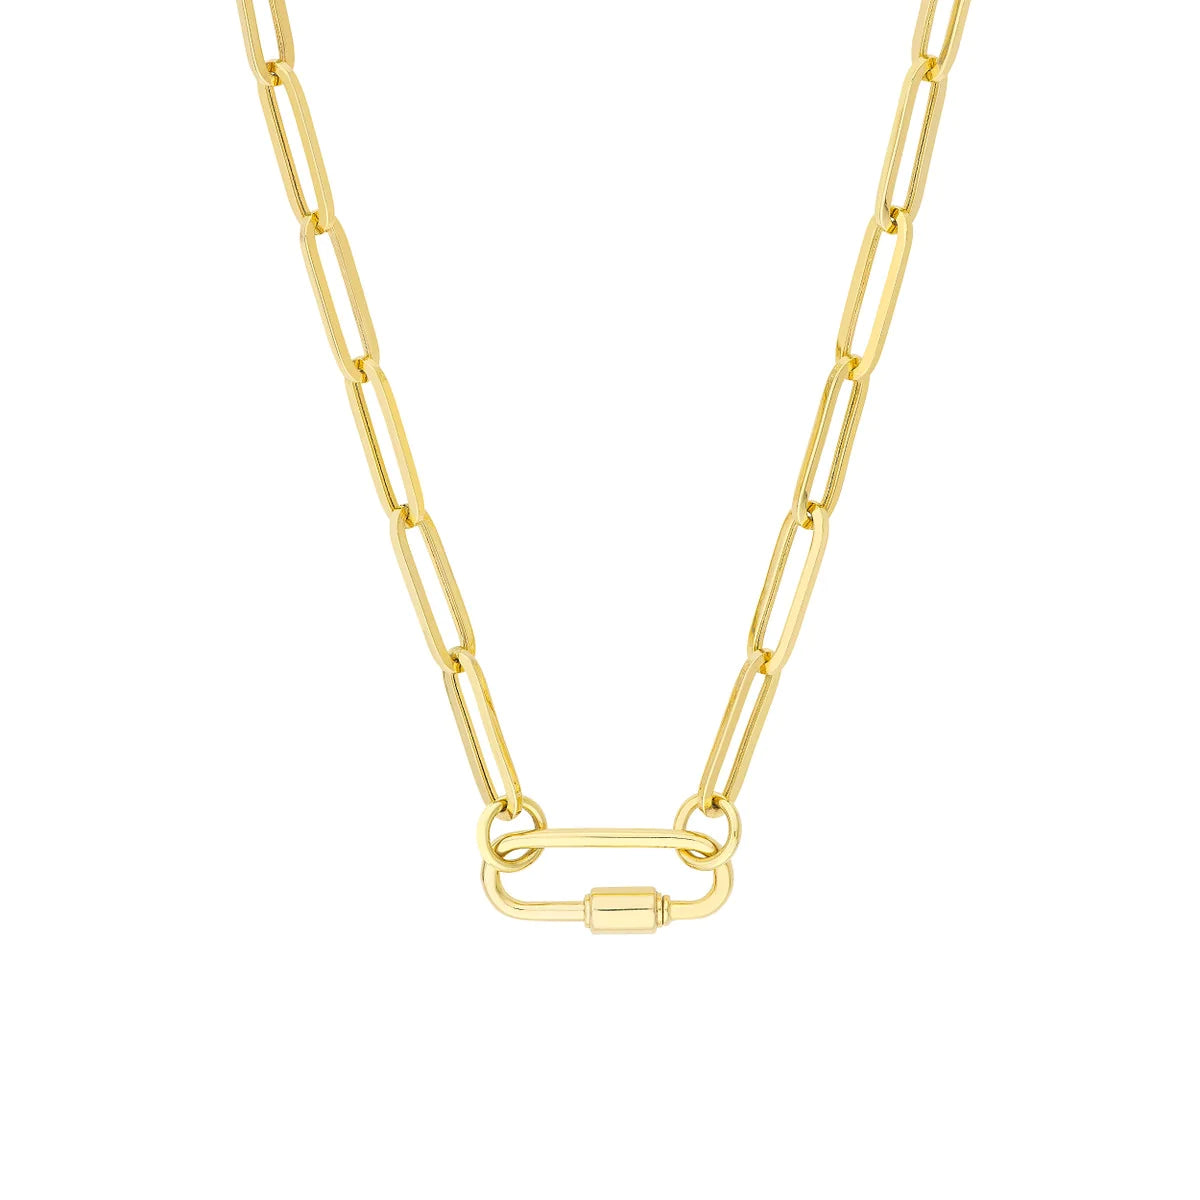 Yellow Gold Carabiner Lock Pendant - 14k Ribbed Clasp Opens Italy - Wilson  Brothers Jewelry